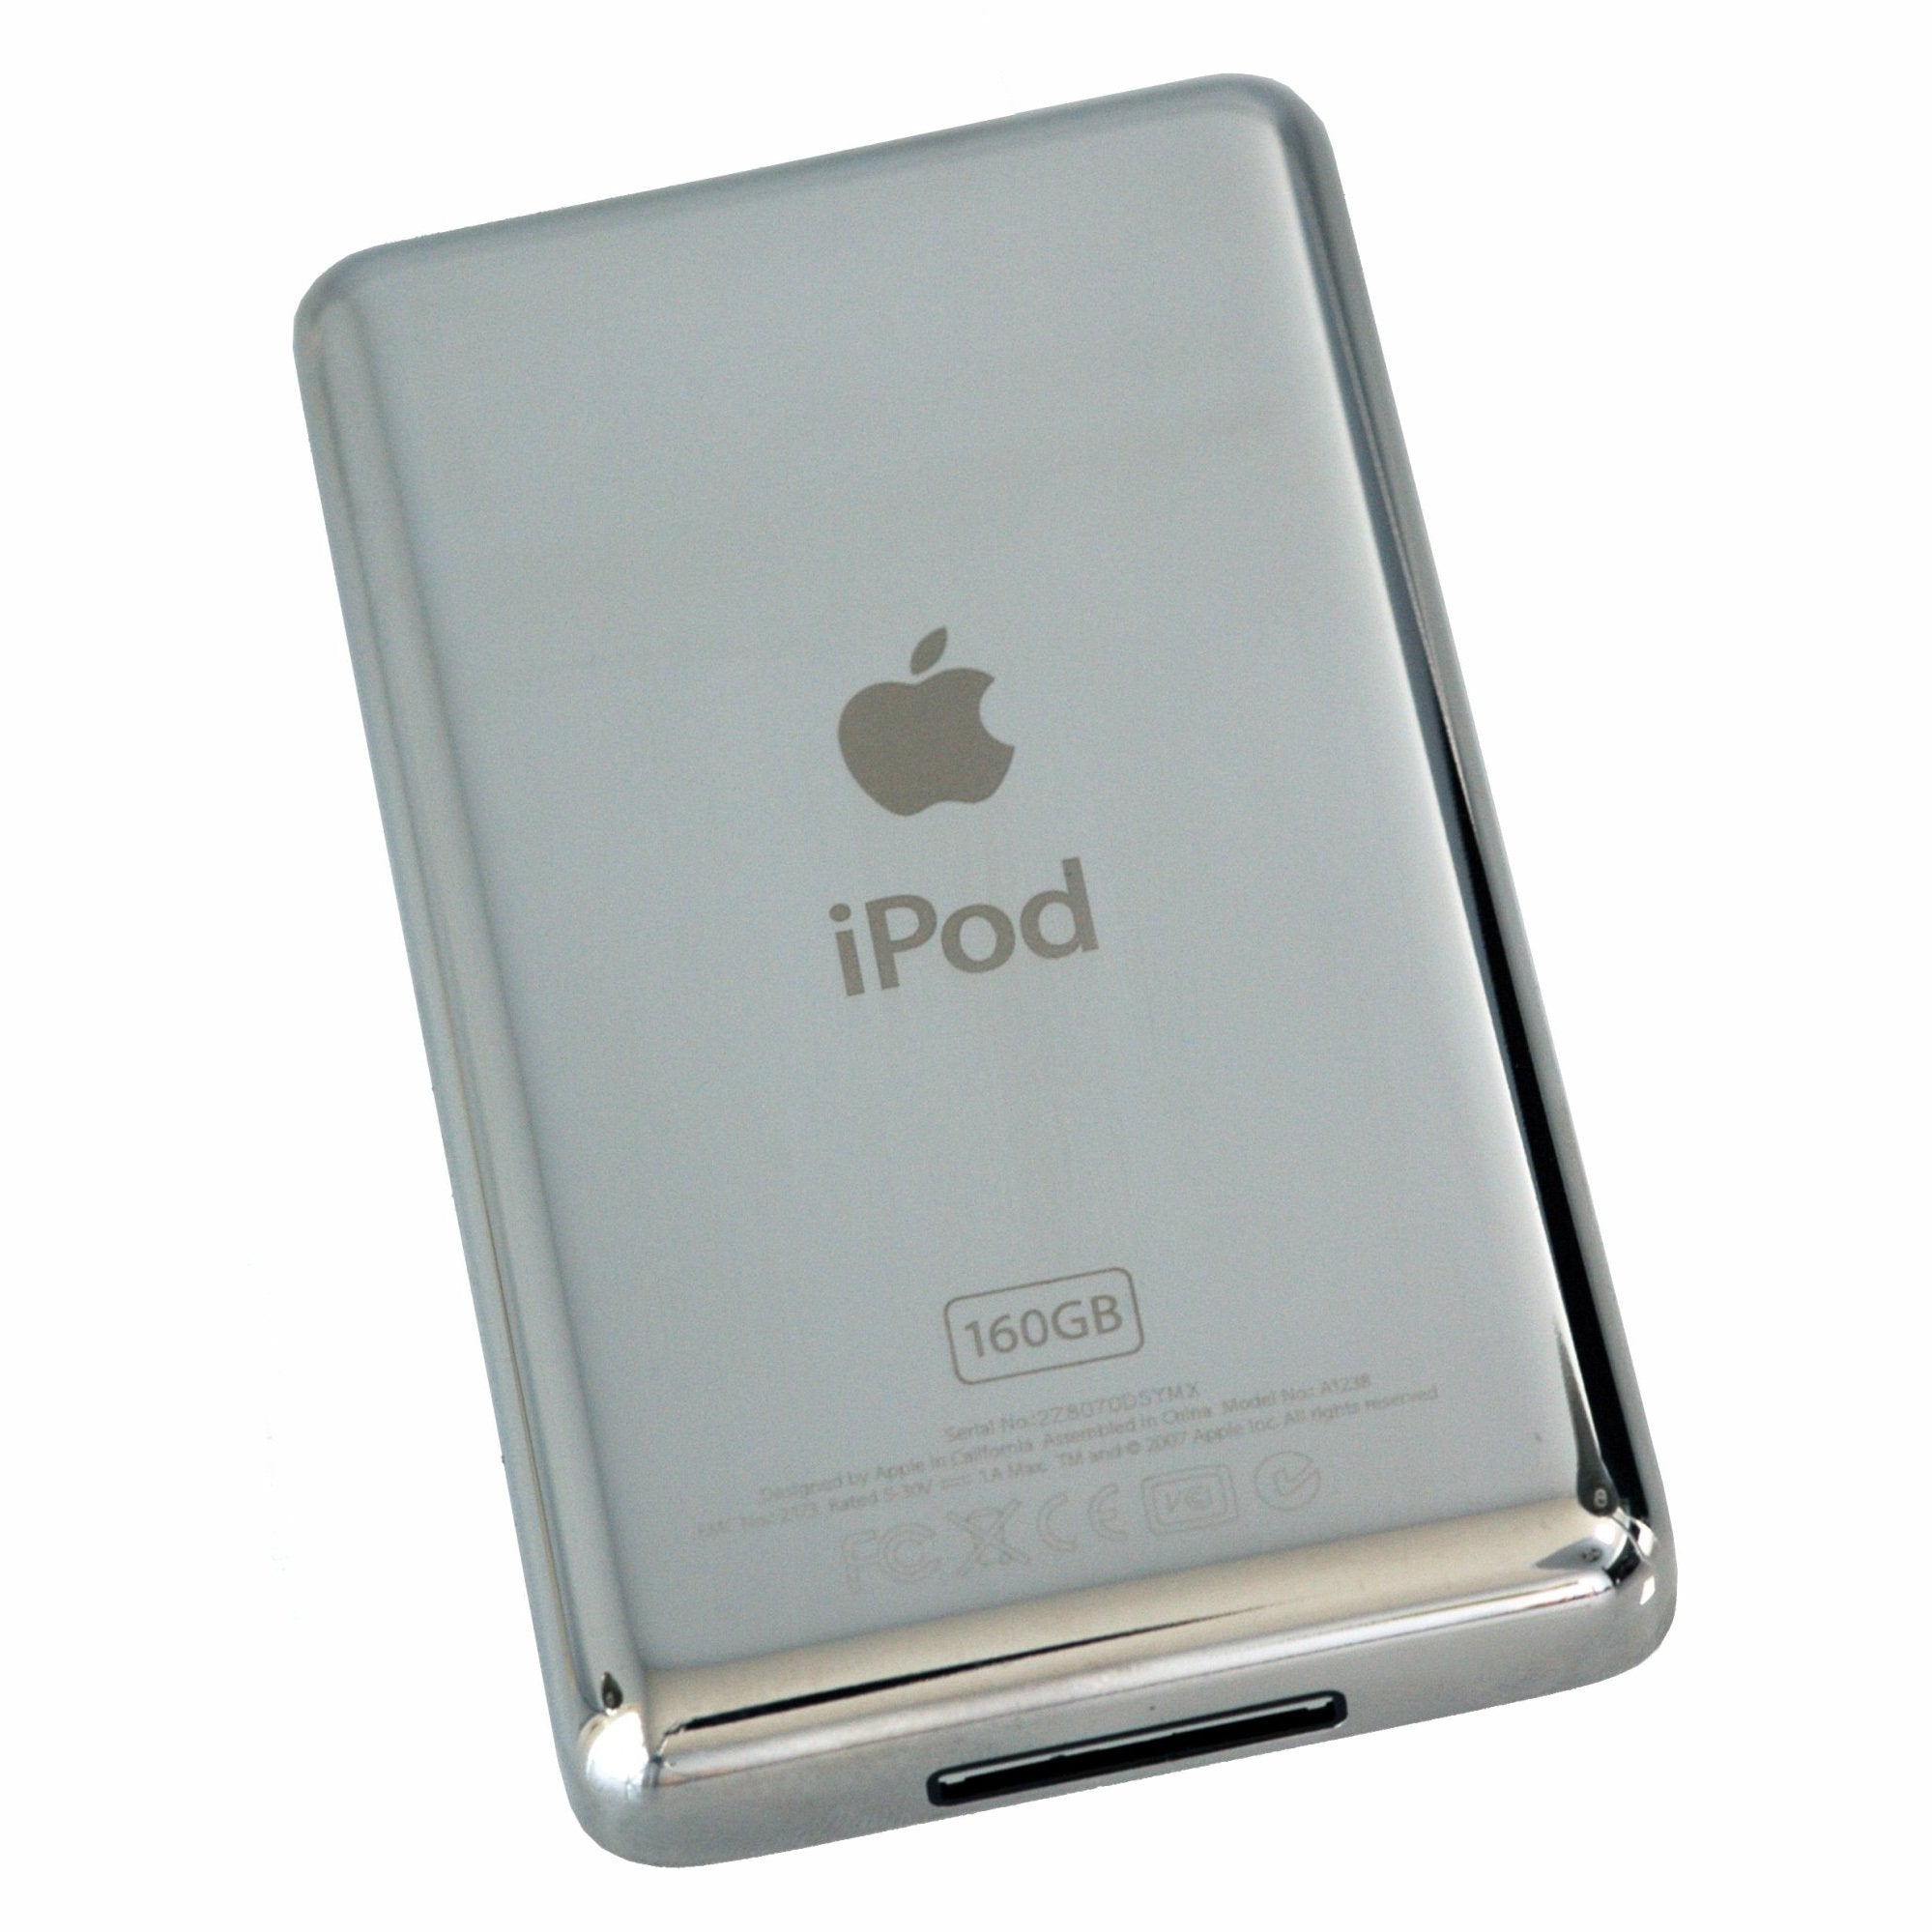 iPod Classic Thick Rear Panel